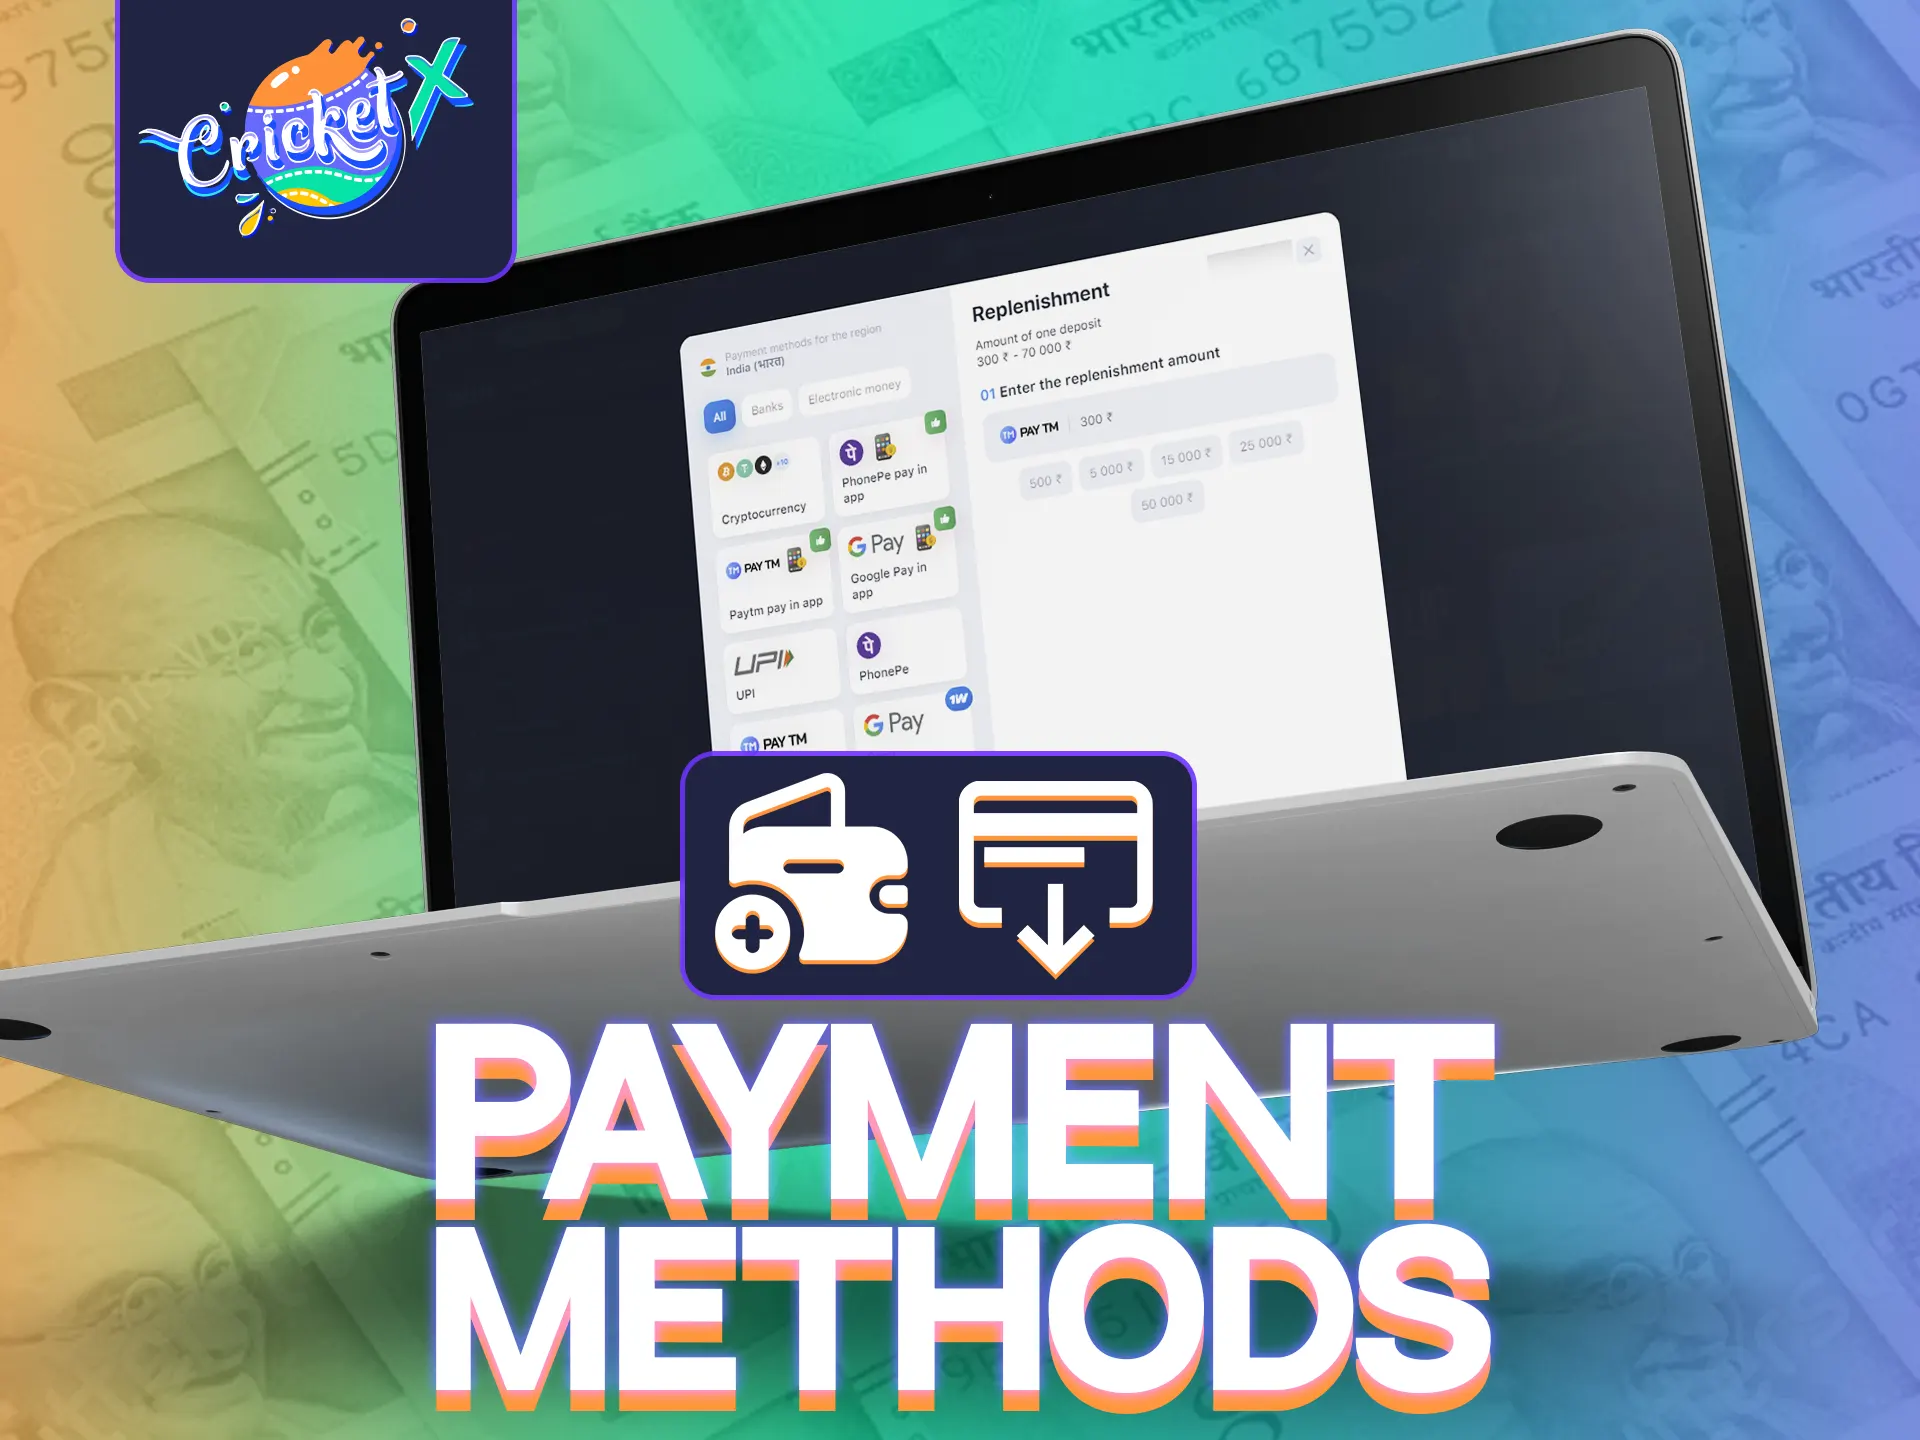 Enjoy the variety of payment methods for the playing CricketX game.